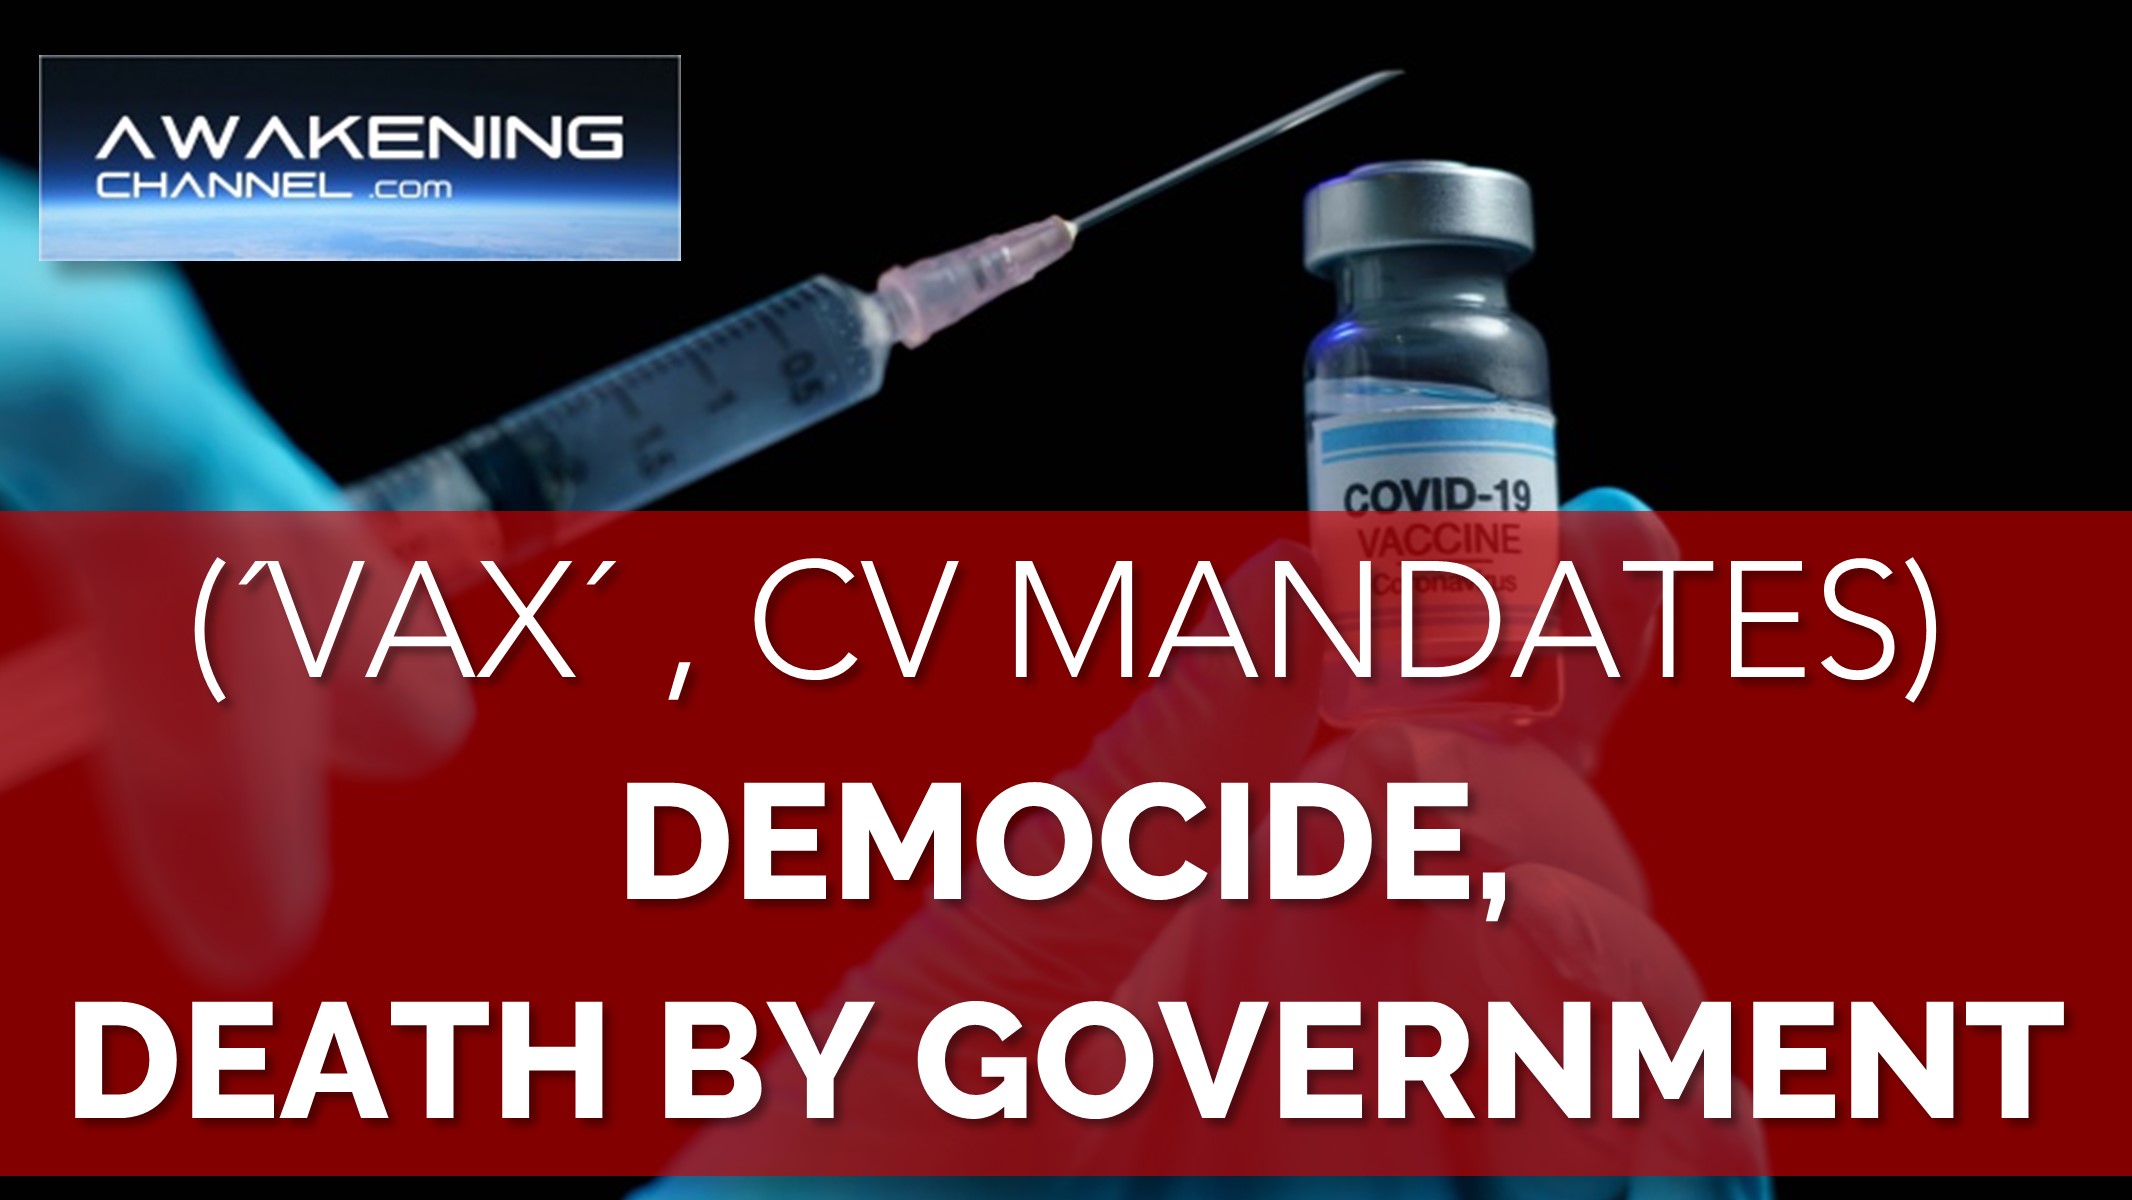 (´Vax´, Mandates) Democide = Death By Government